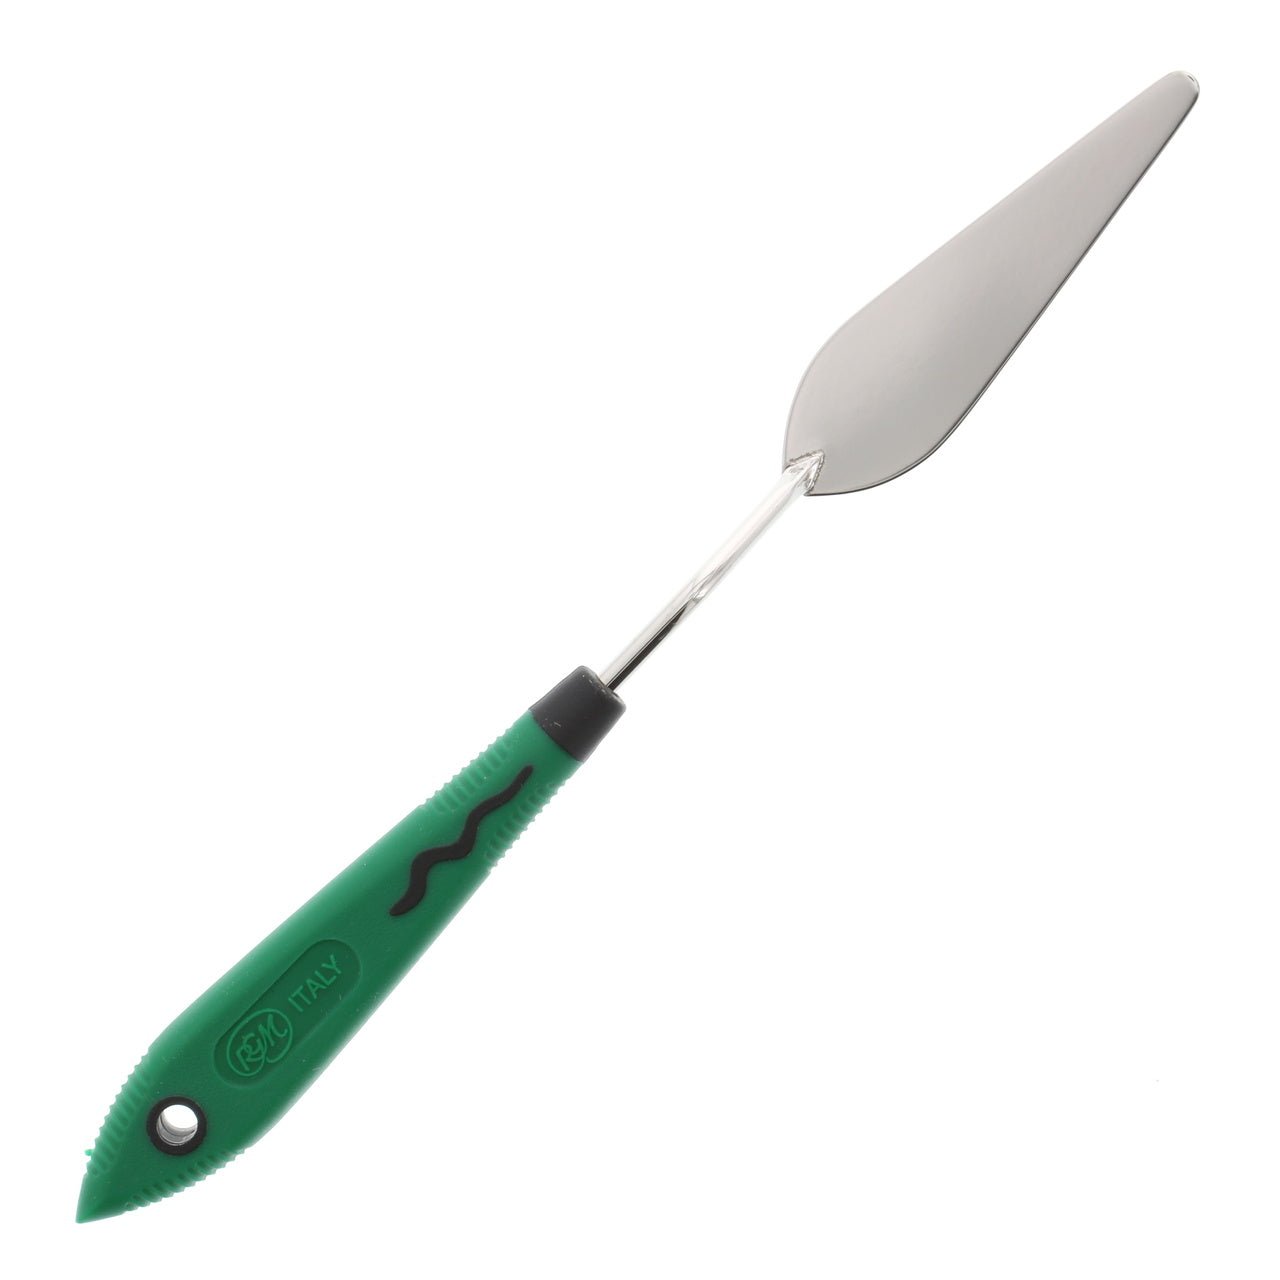 RGM Soft Grip Painting Knife #013 (Green Handle)